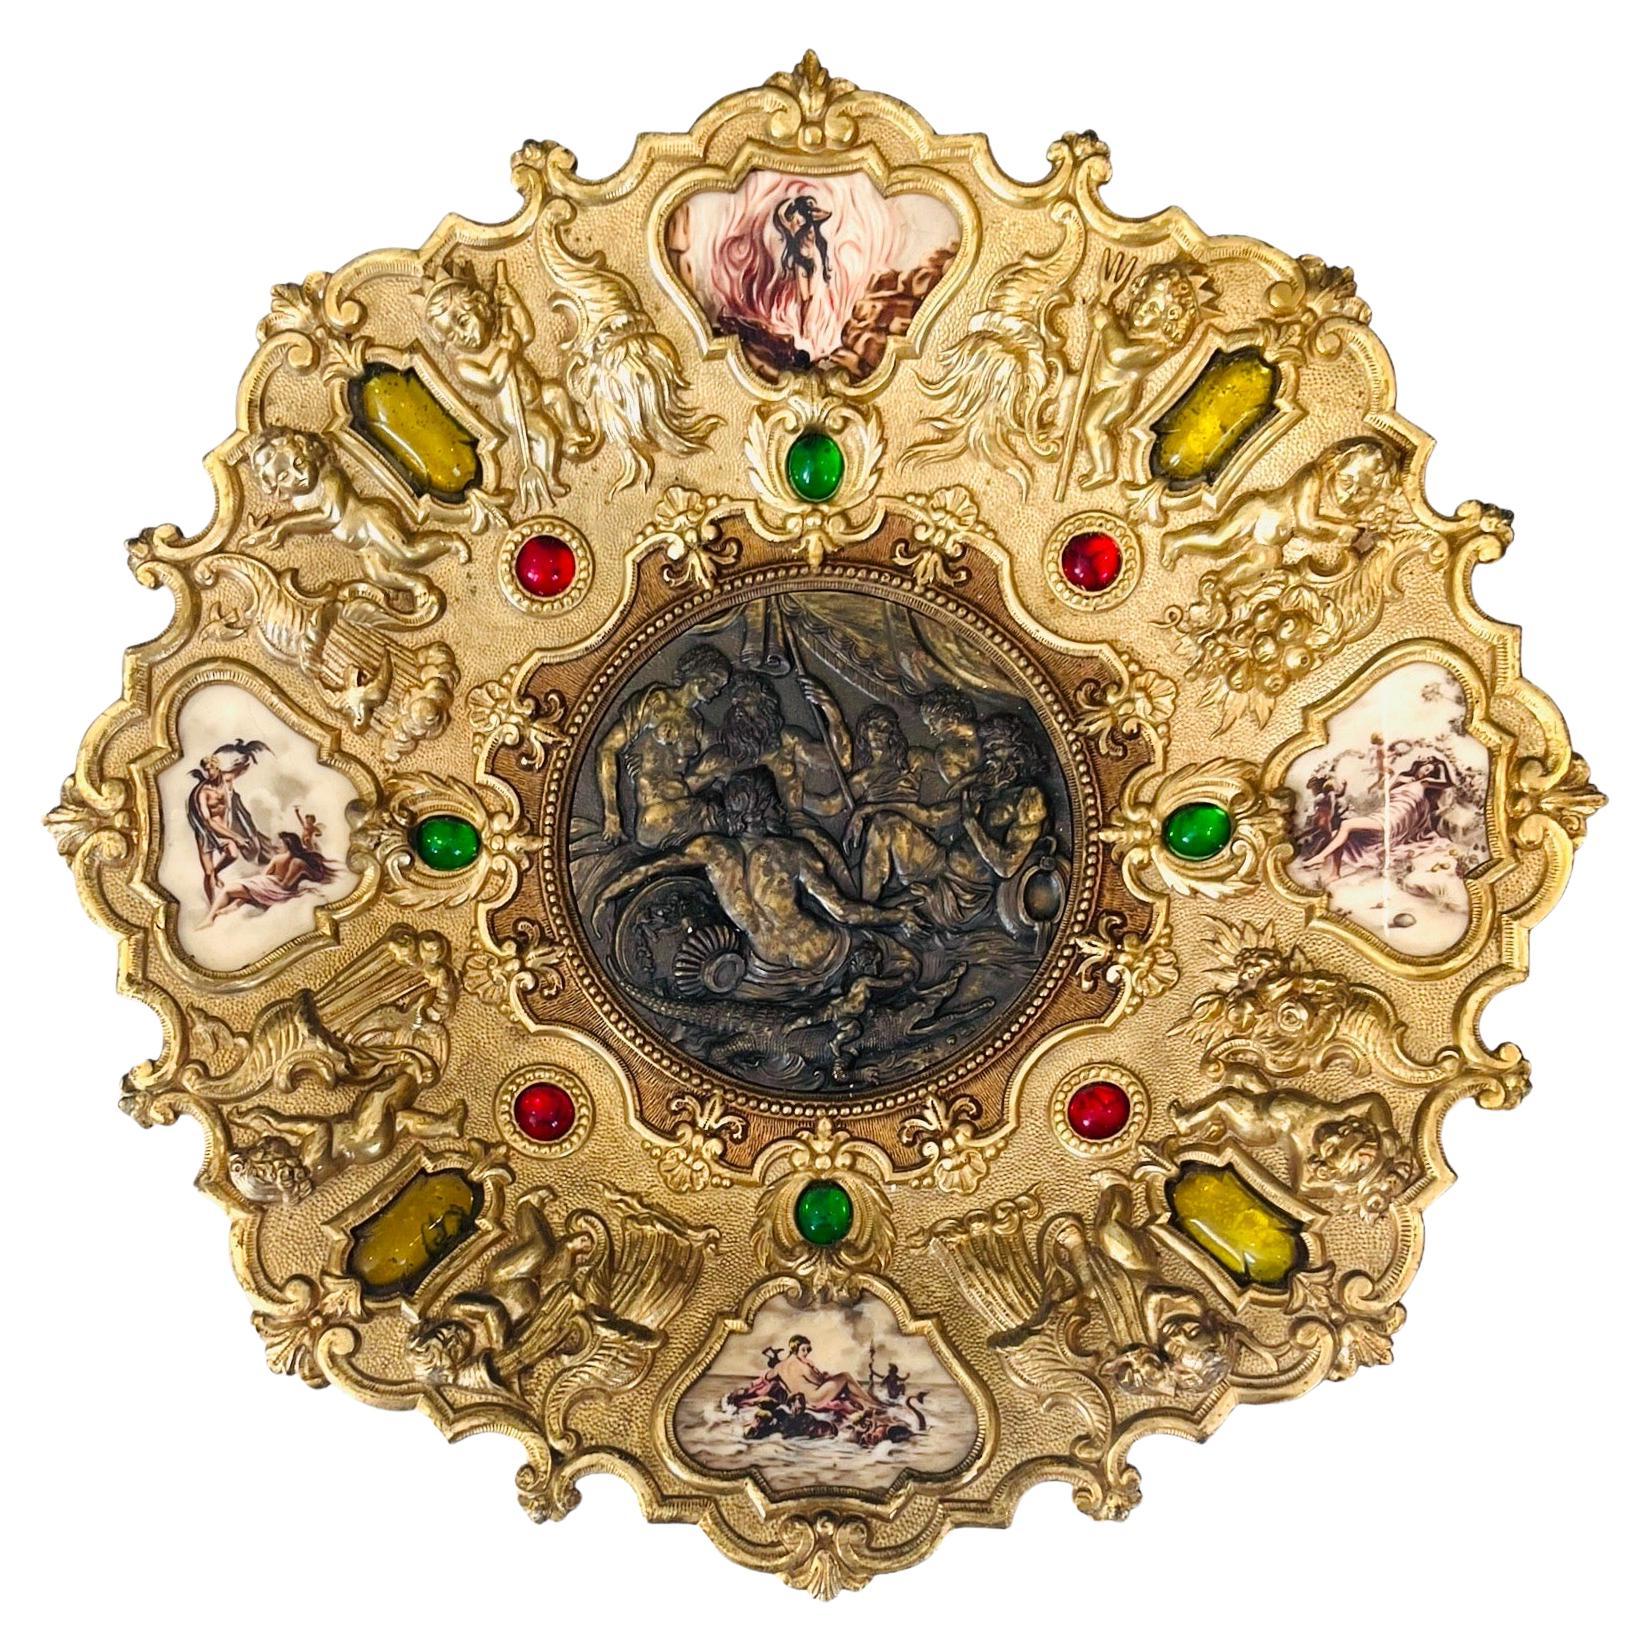 Large Gilt Bronze Medallion Plate with putti, mythology, nymph - Italy - 19th